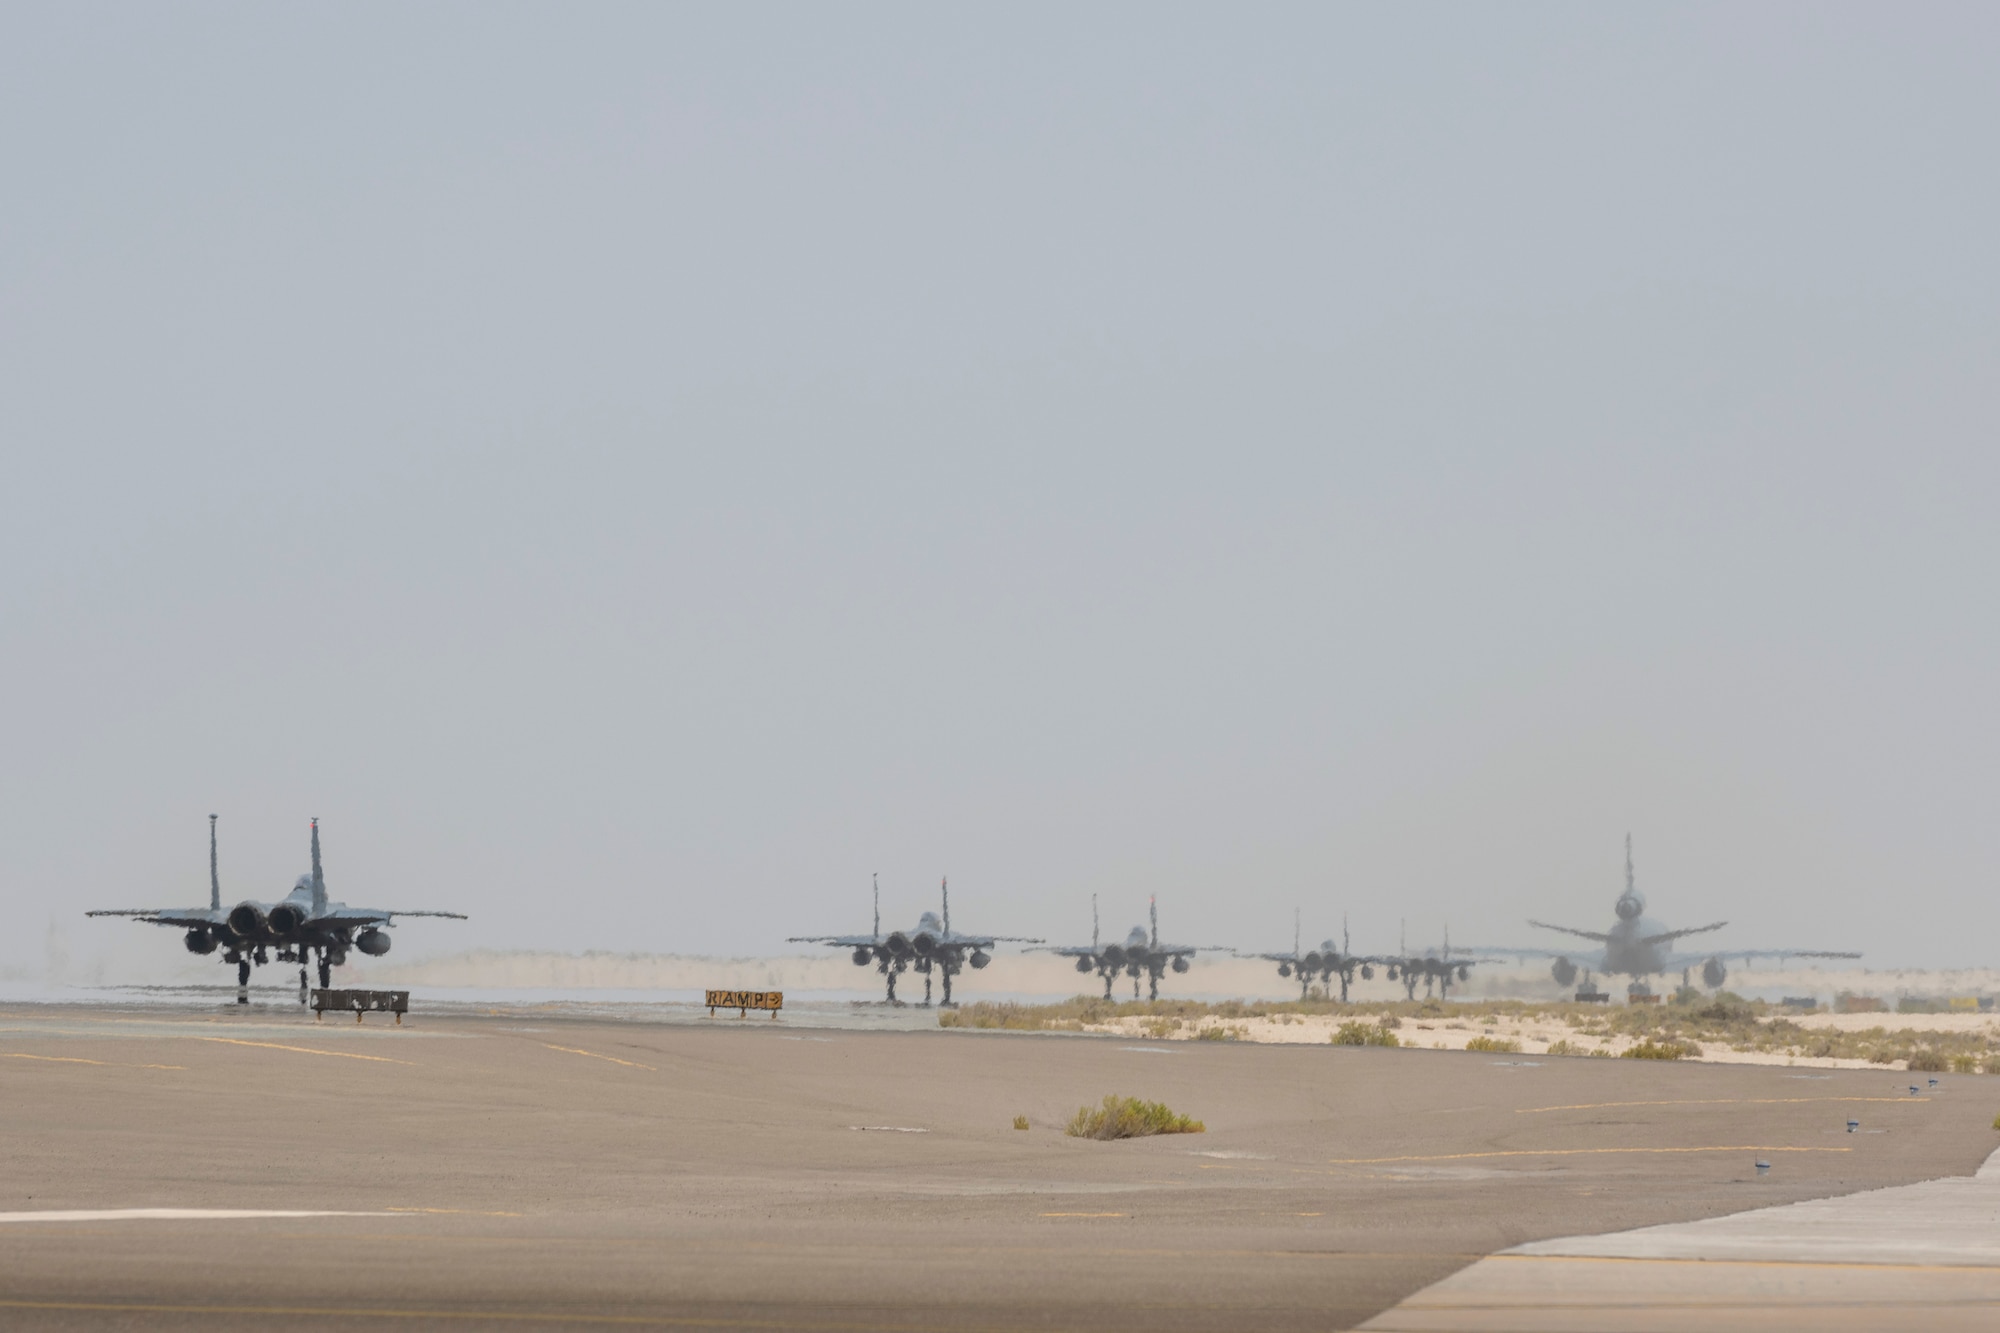 A KC-10 and 5 F-15s taxi down the runway